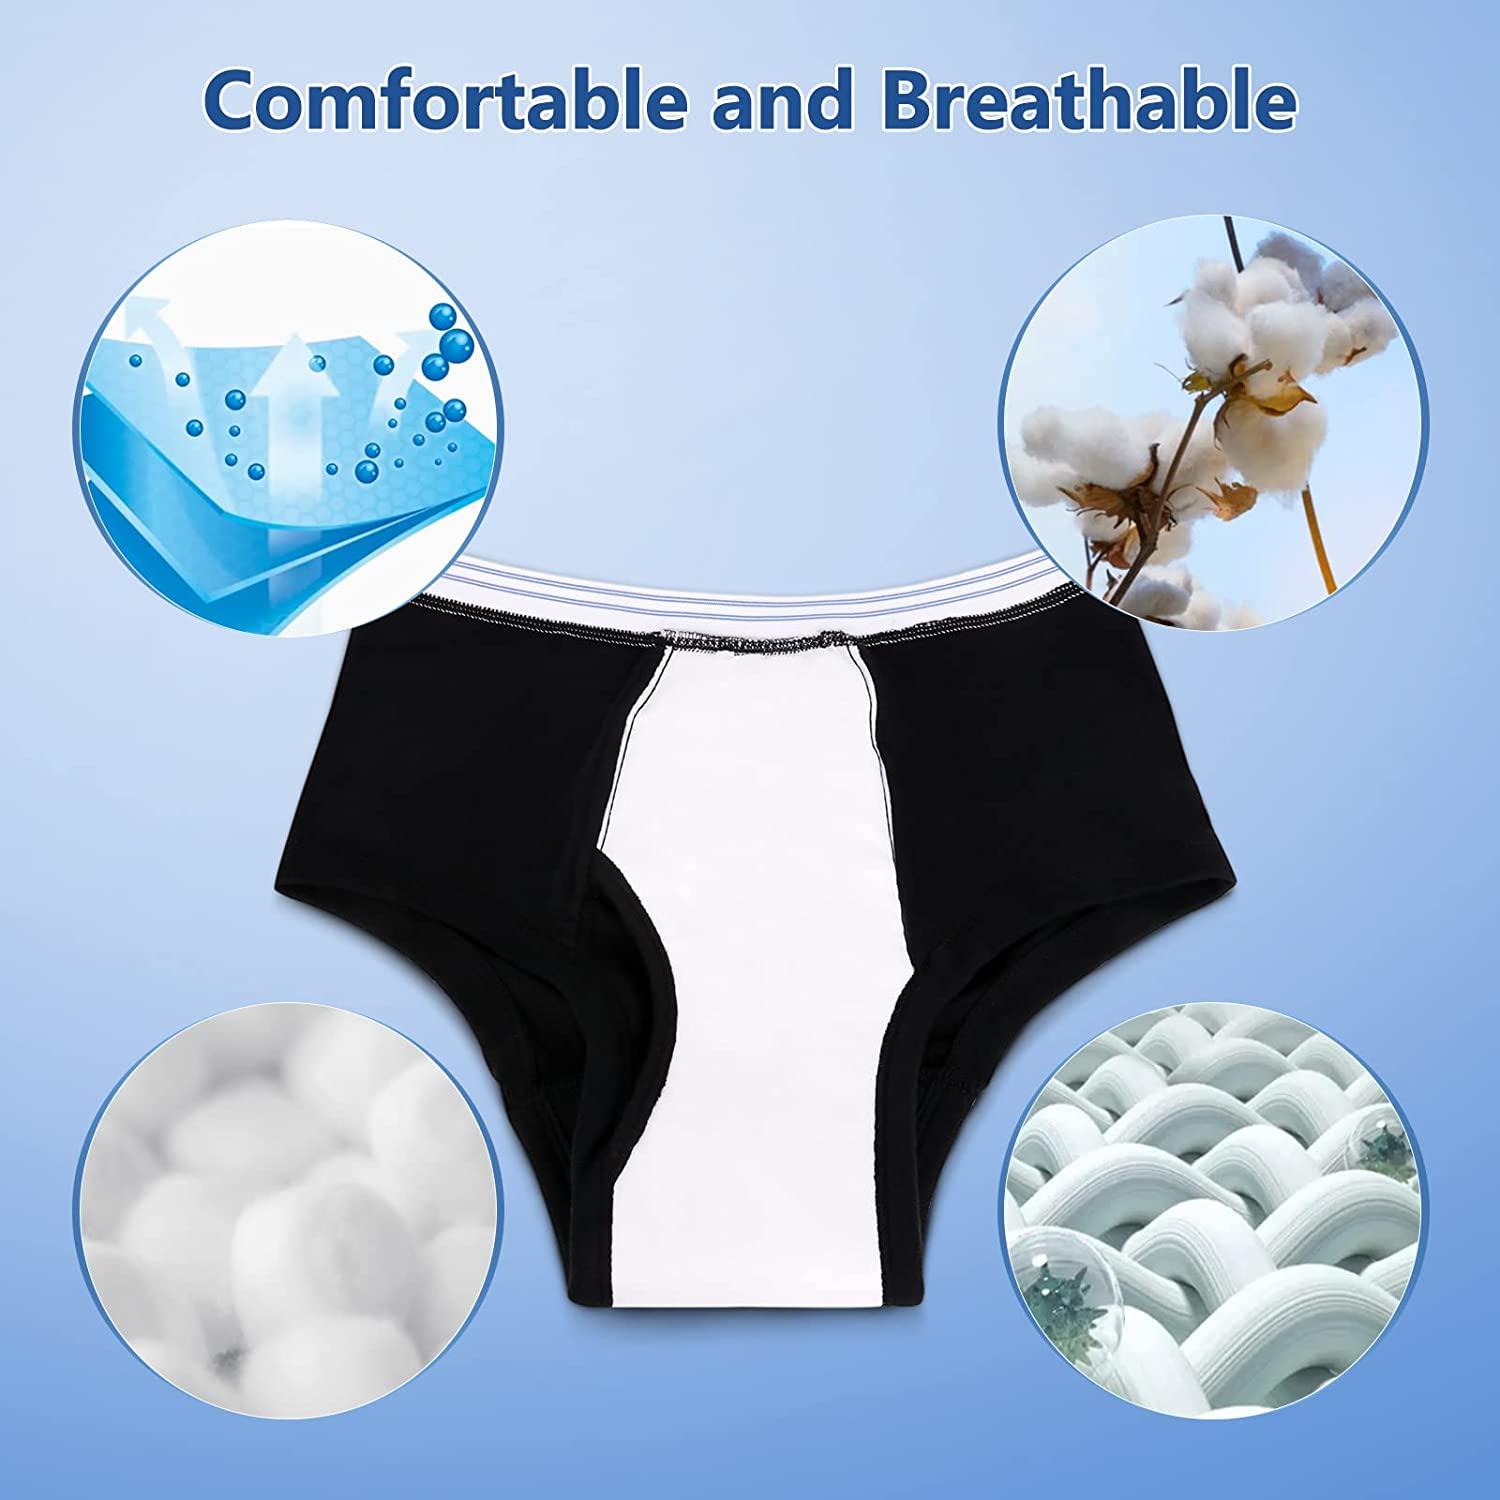 Women's Moderate/Severe Urinary Incontinence Briefs Leak Proof Washable  Reusable Underwear for Urinary Incontinence Special Needs Incontinence  Pants